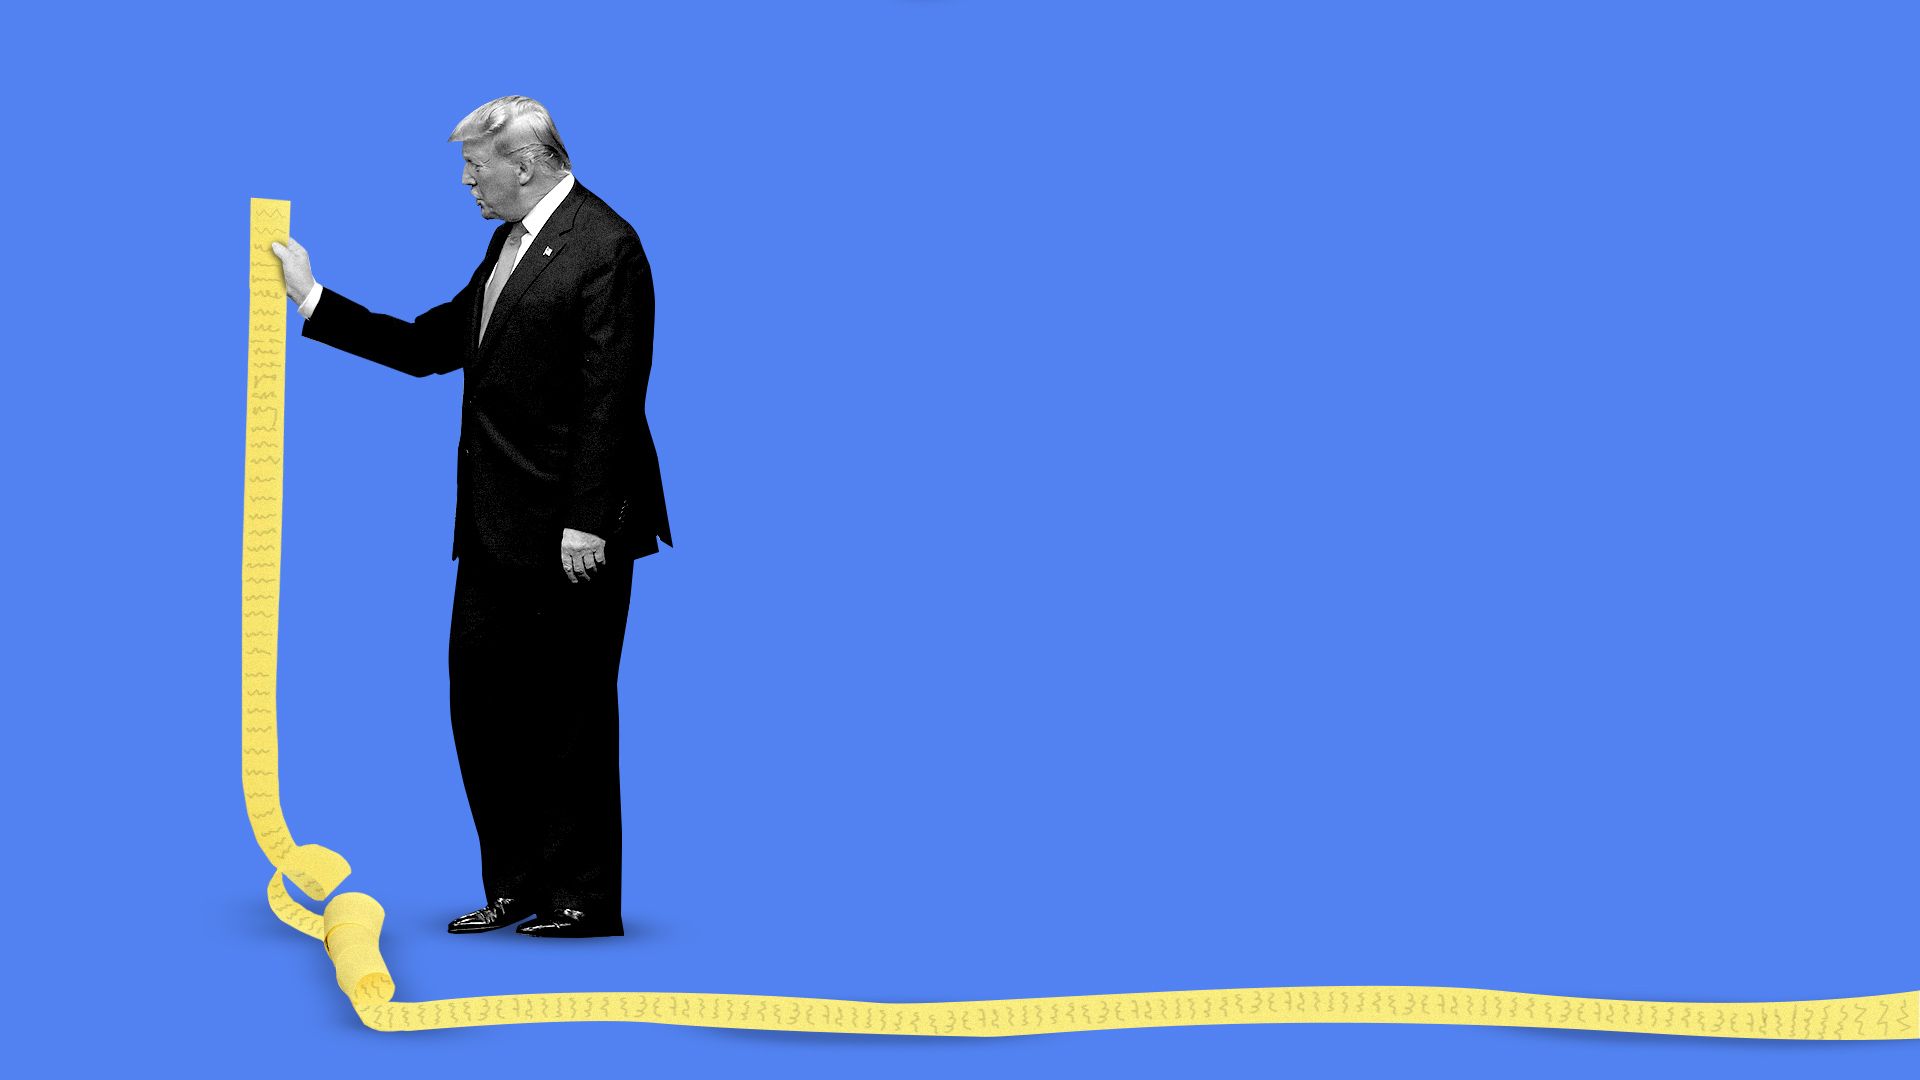 Illustration of President Trump holding an extremely long list.